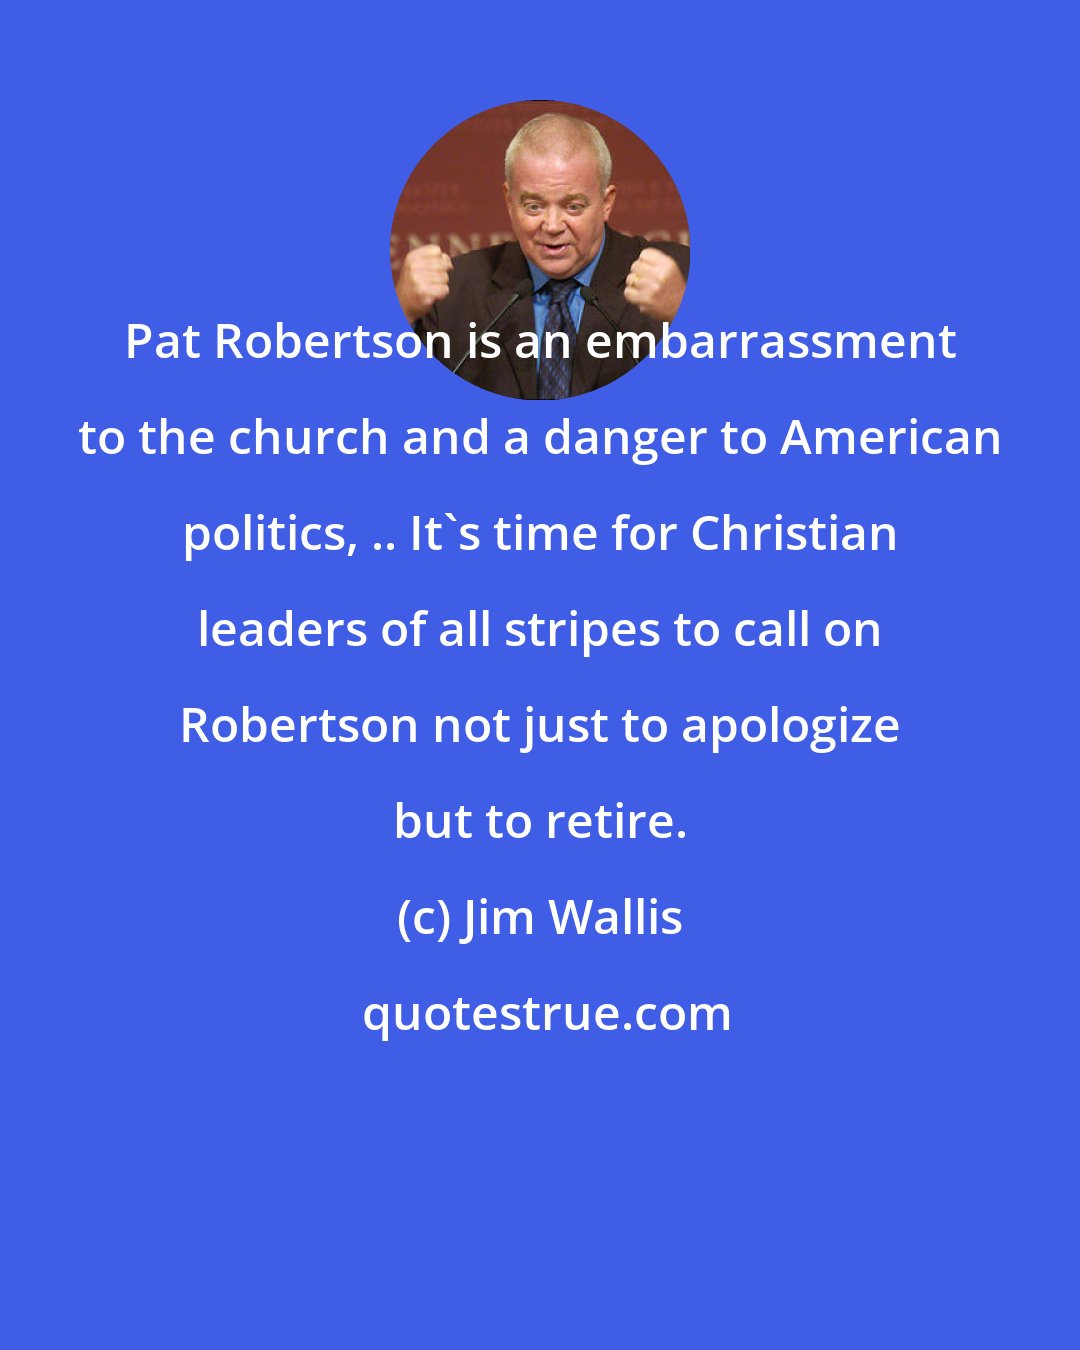 Jim Wallis: Pat Robertson is an embarrassment to the church and a danger to American politics, .. It's time for Christian leaders of all stripes to call on Robertson not just to apologize but to retire.